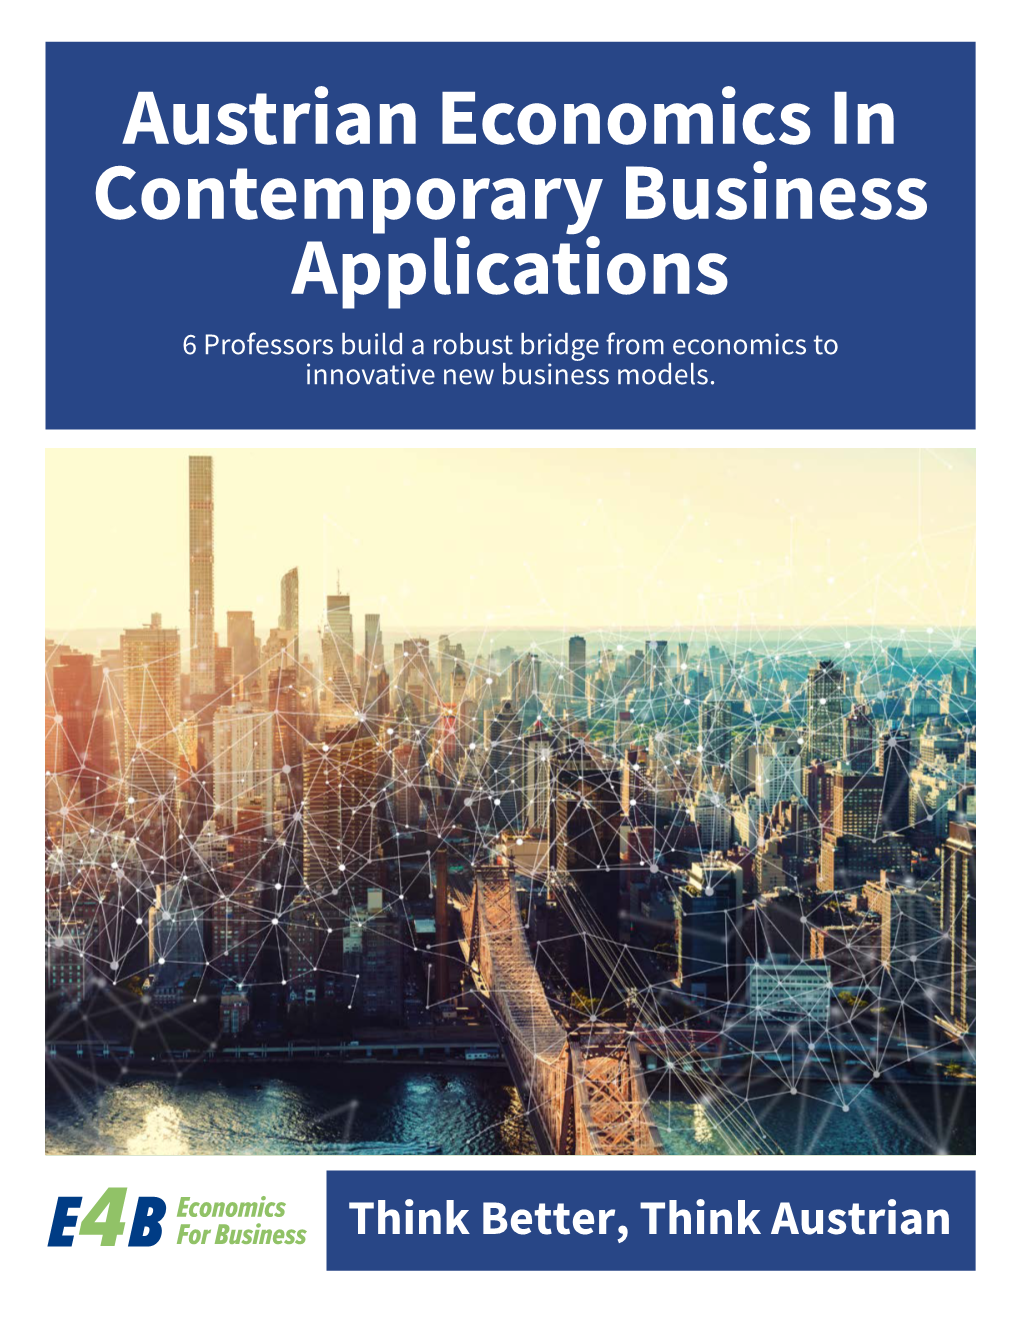 Austrian Economics in Contemporary Business Applications 6 Professors Build a Robust Bridge from Economics to Innovative New Business Models